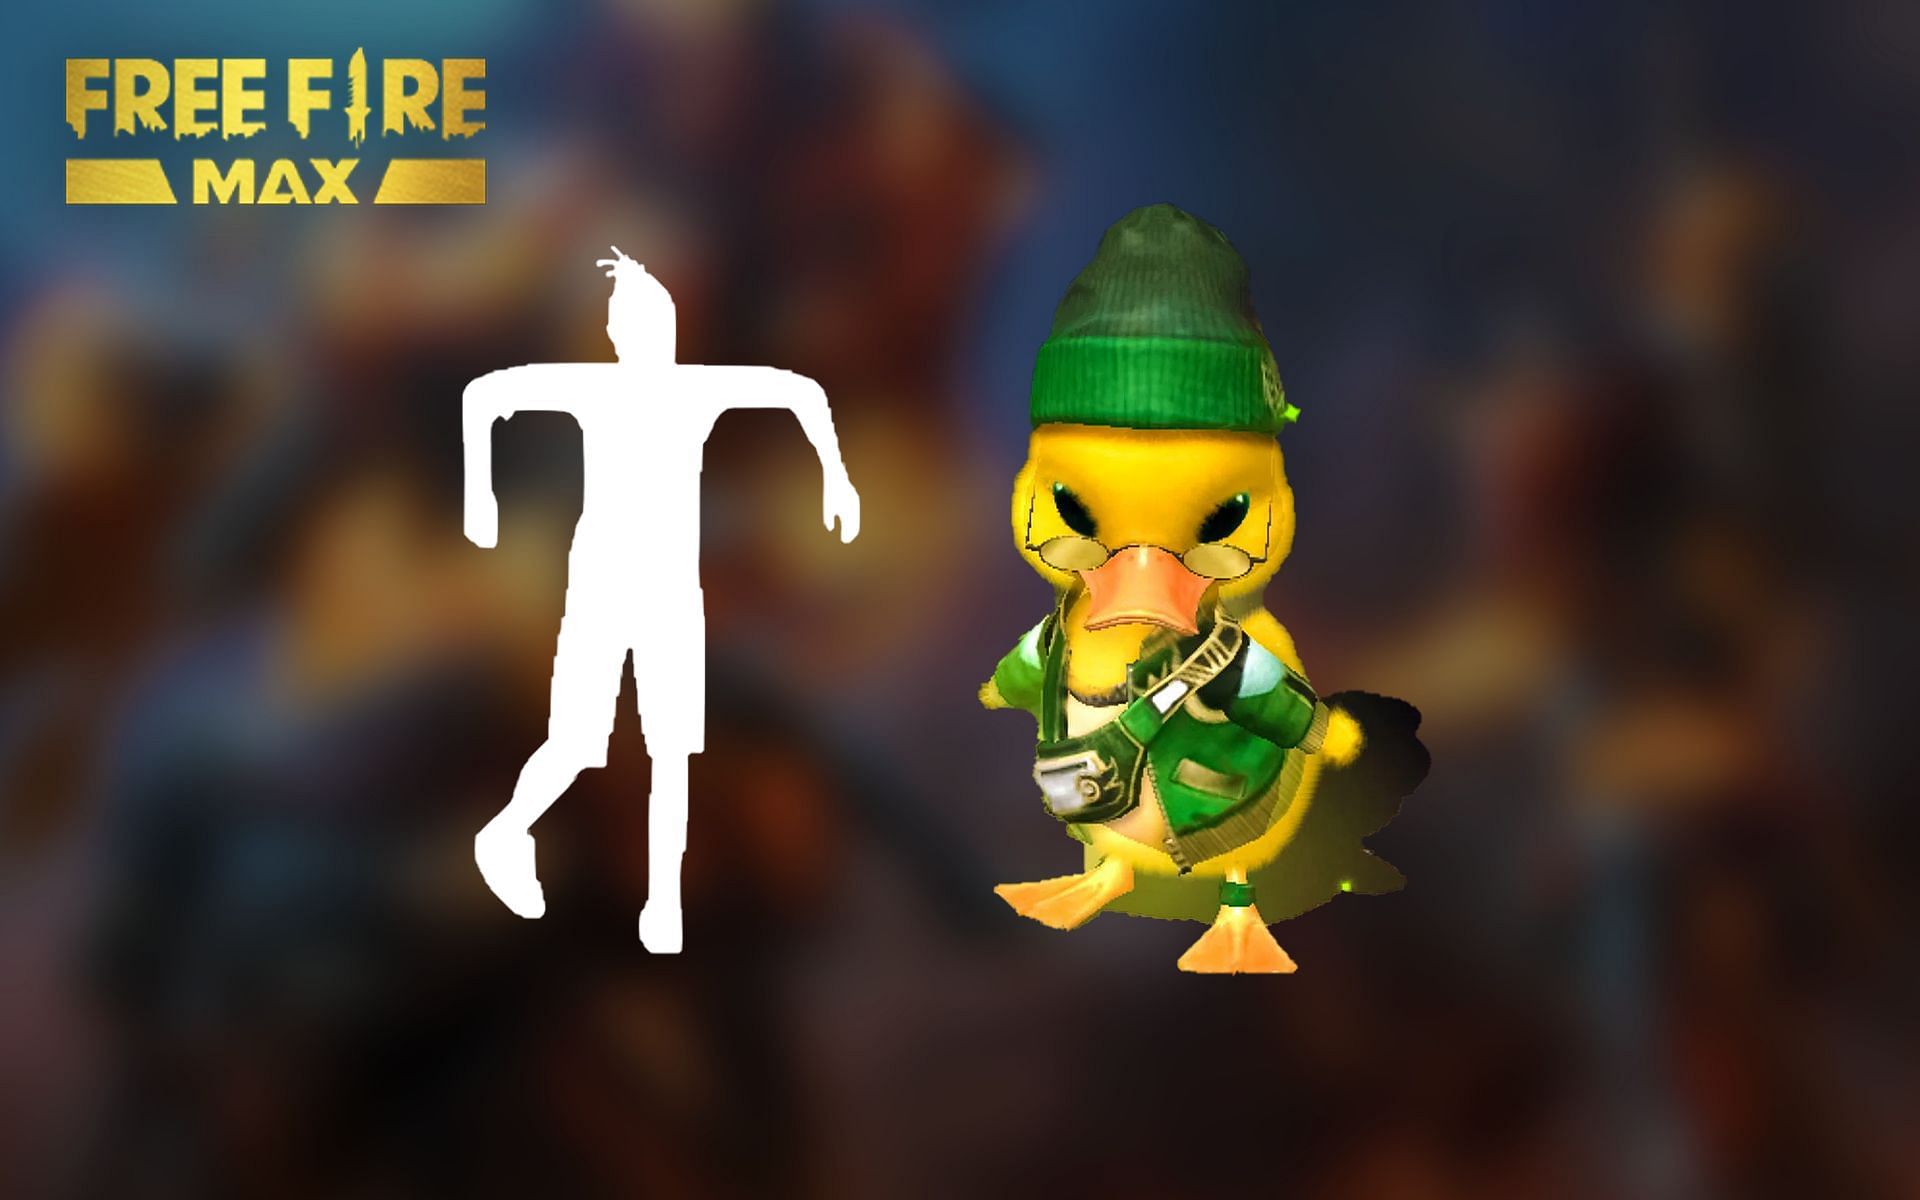 This emote and pet skin are among the rewards available for the players (Image via Sportskeeda)